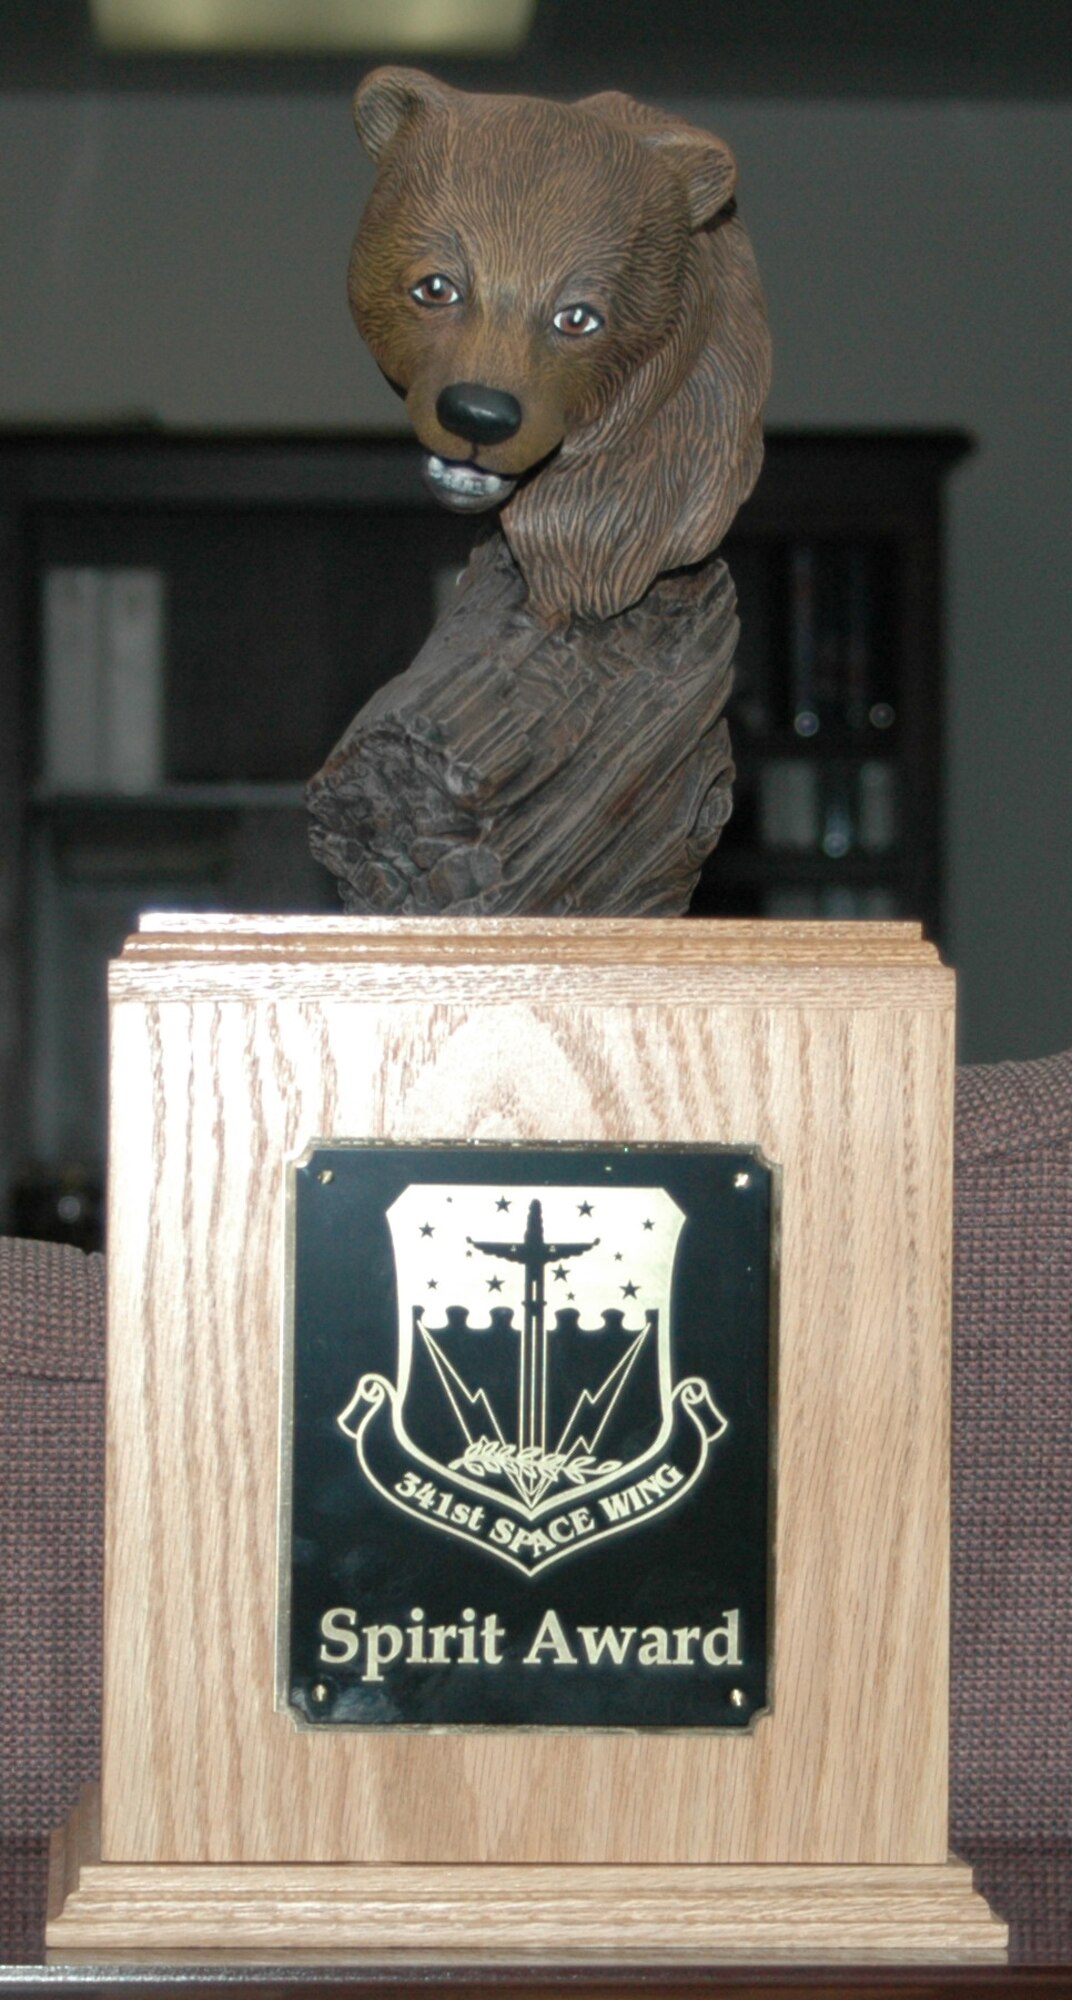 The newest award to be incorporated into the Quarterly Awards ceremony is the Spirit Award. The trophy, which is intended to be transformed by the winner each quarter, is shown in its infant stage. Winners are to add something relevant to their organization without destroying what is already attached before passing it on to the next quarterly winner.